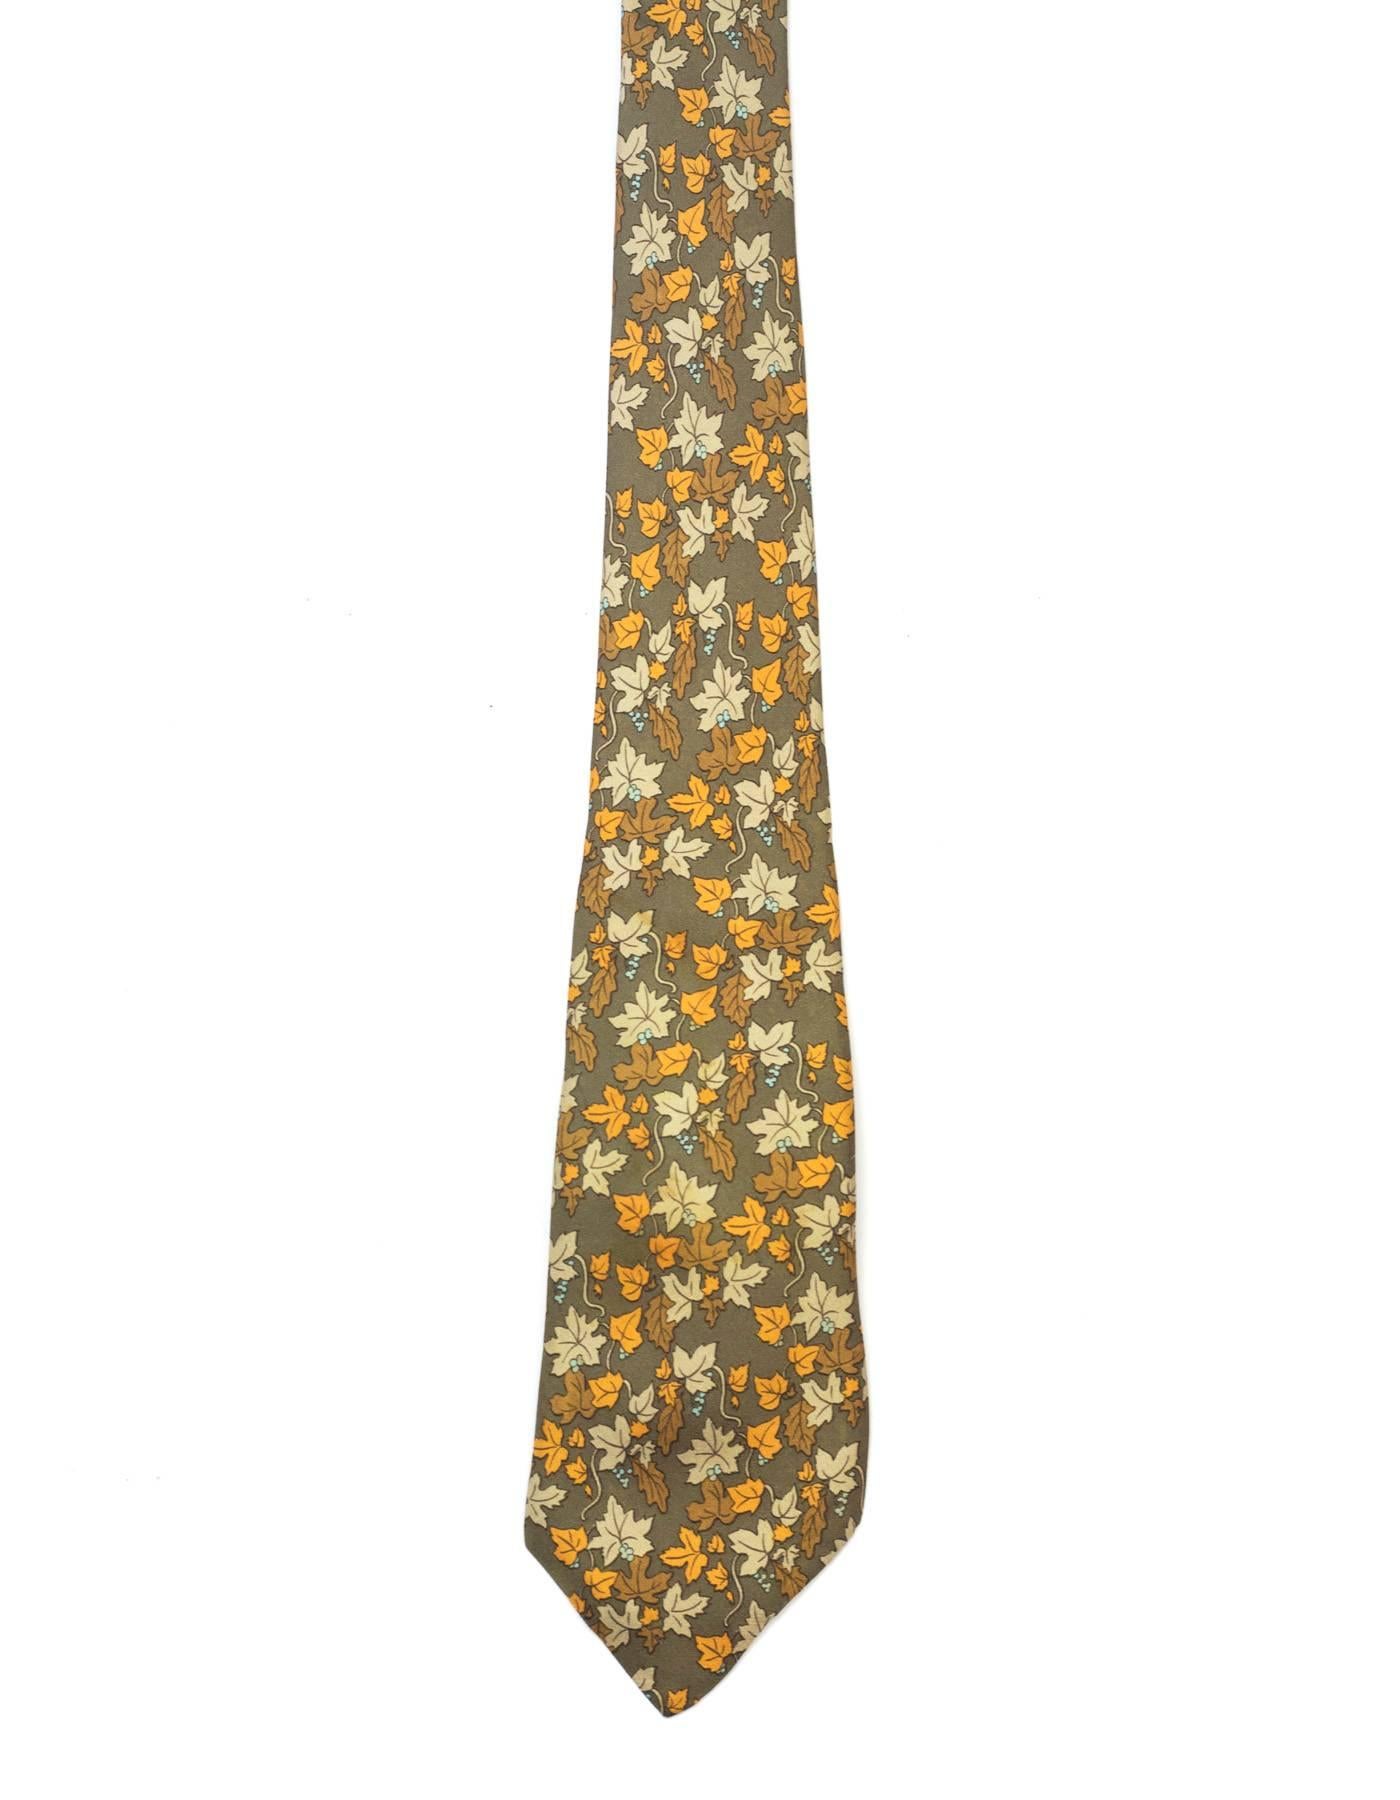 Hermes Olive Autumn Leaves Printed Silk Tie
Features grapevines printed throughout

Made In: France
Color: Olive green, orange, grey and blue
Composition: 100% silk
Overall Condition: Excellent pre-owned condition with the exception of a small mark